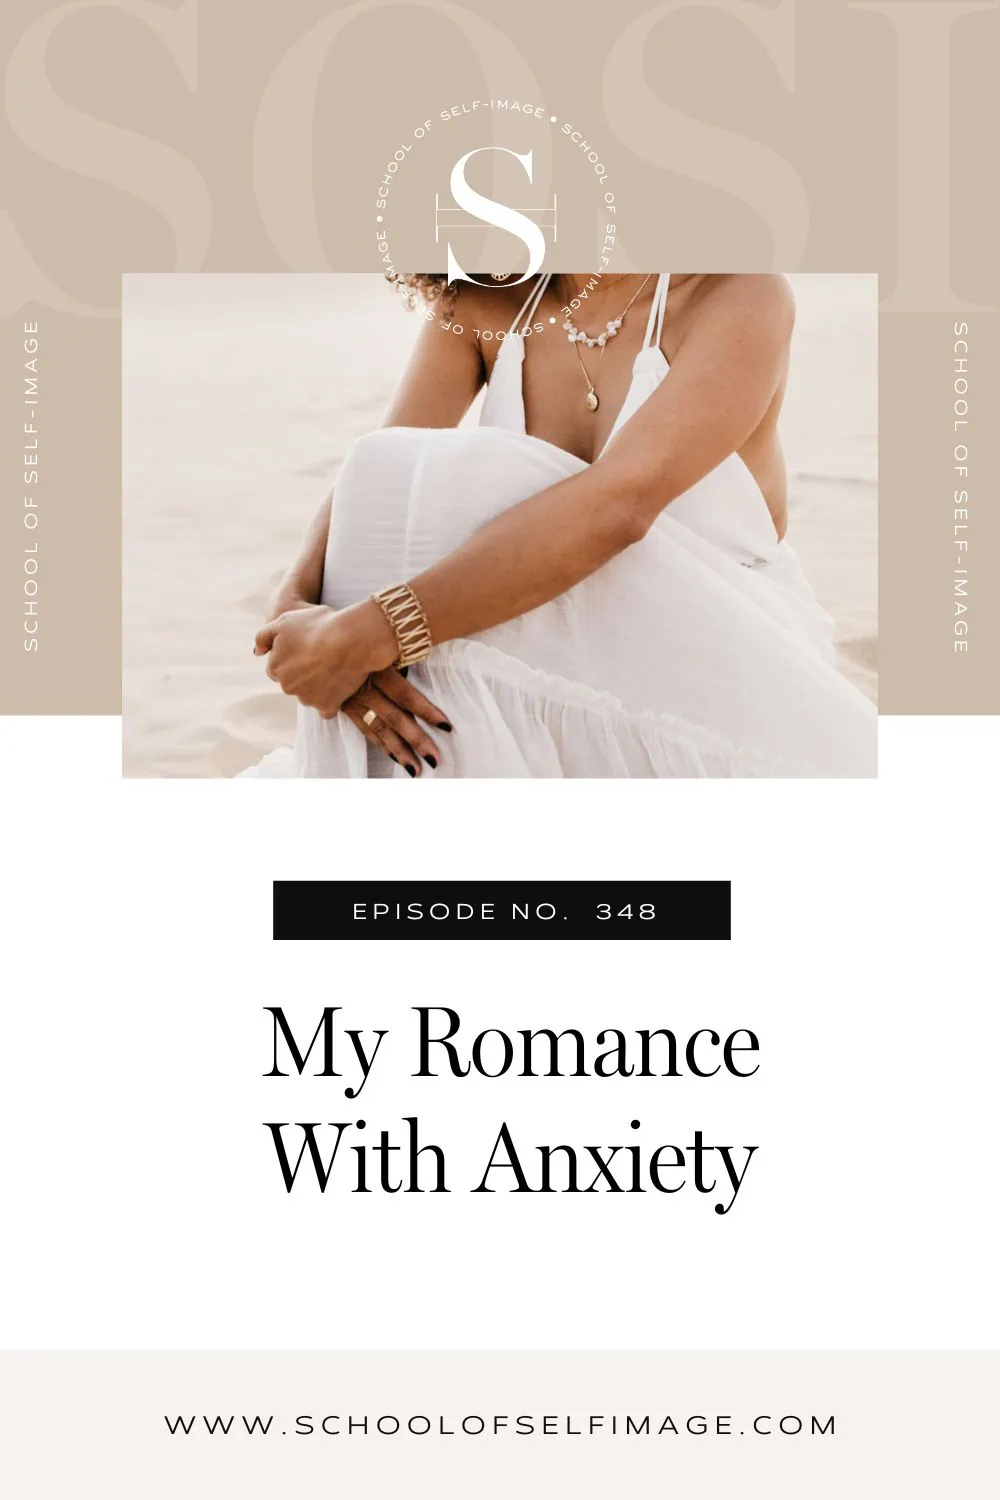 My Romance with Anxiety